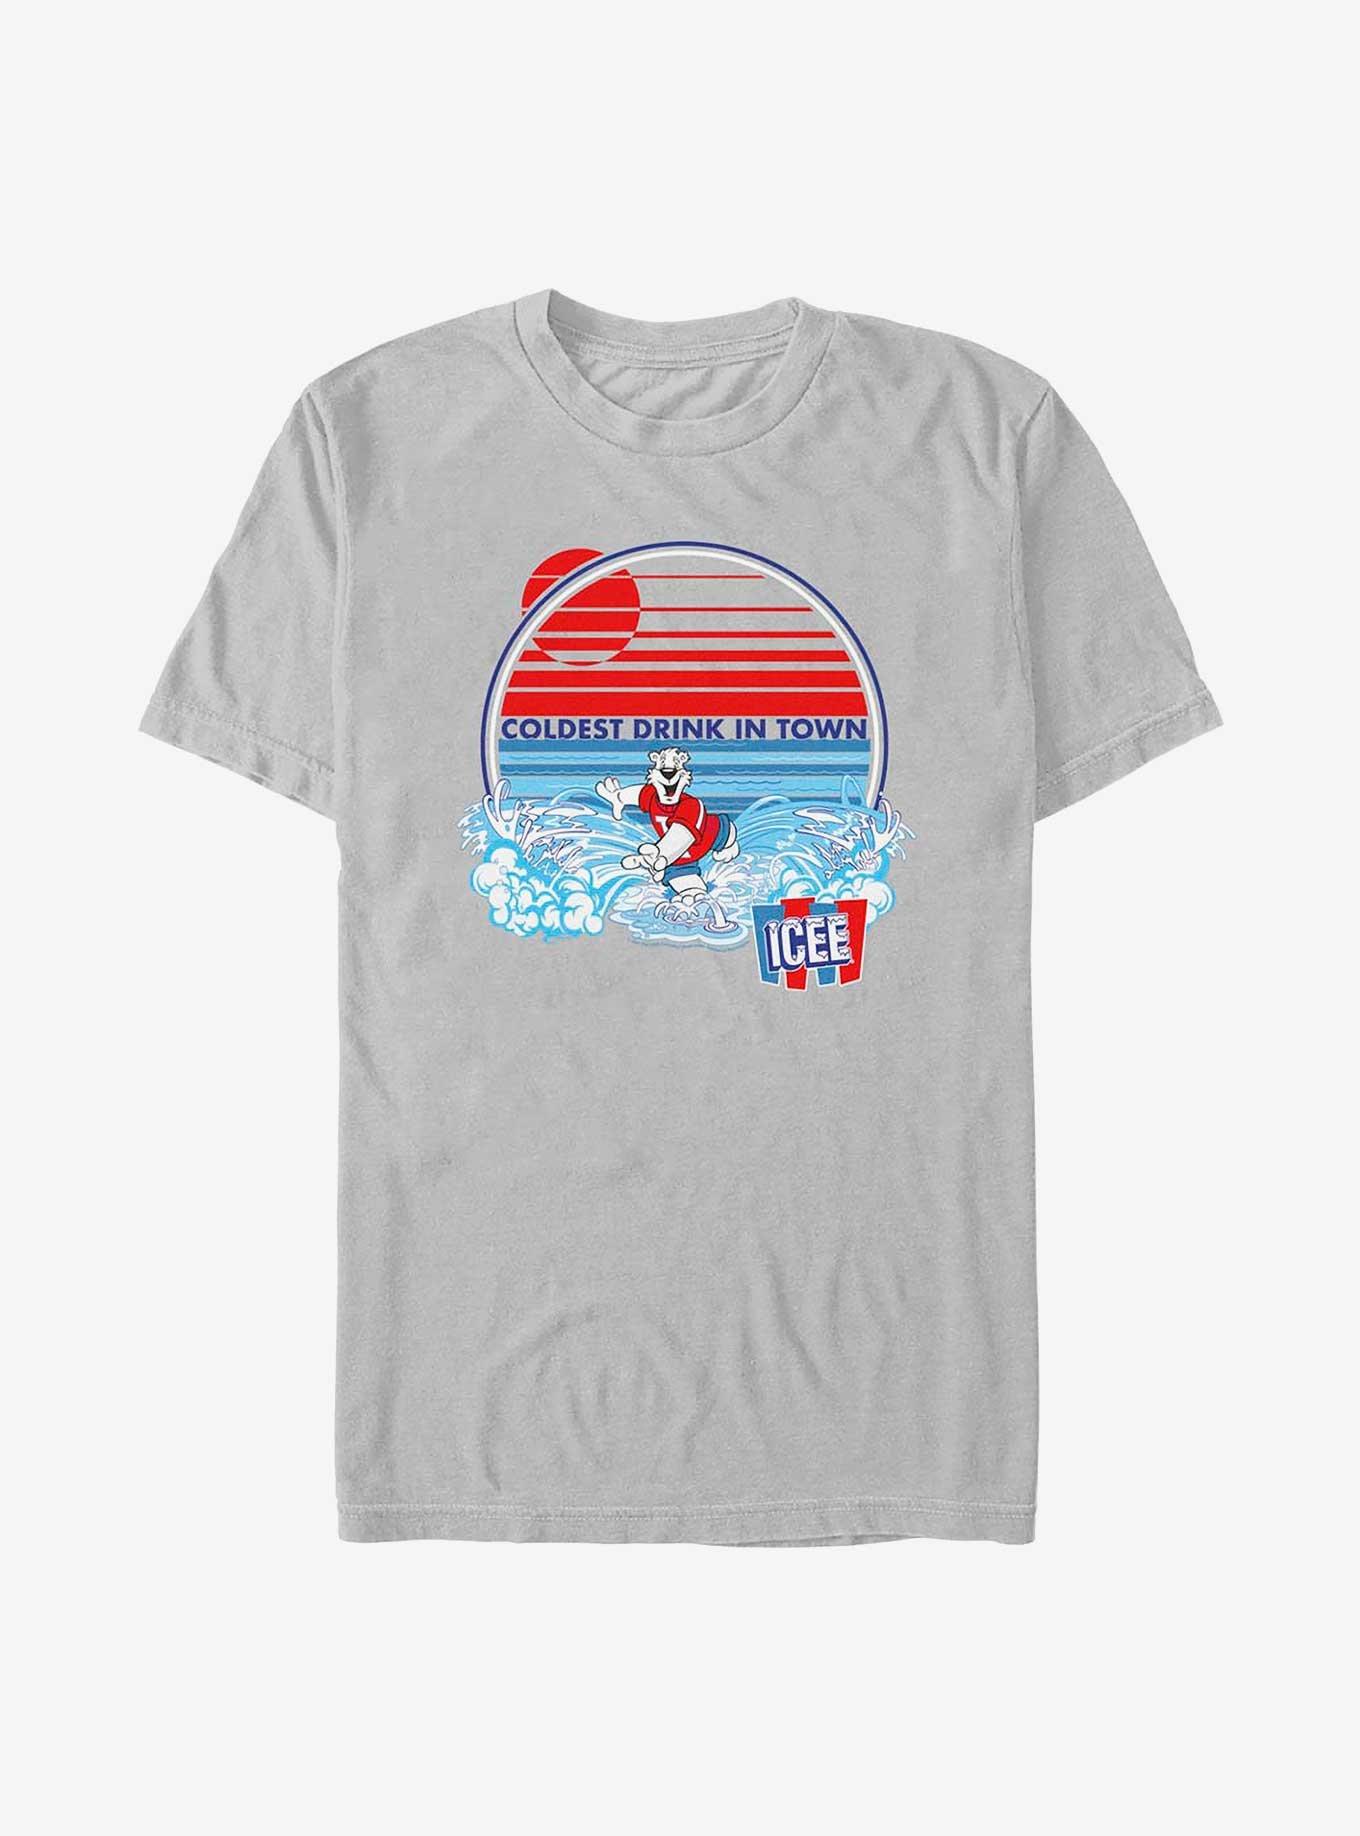 Icee Ride The Wave T-Shirt, SILVER, hi-res